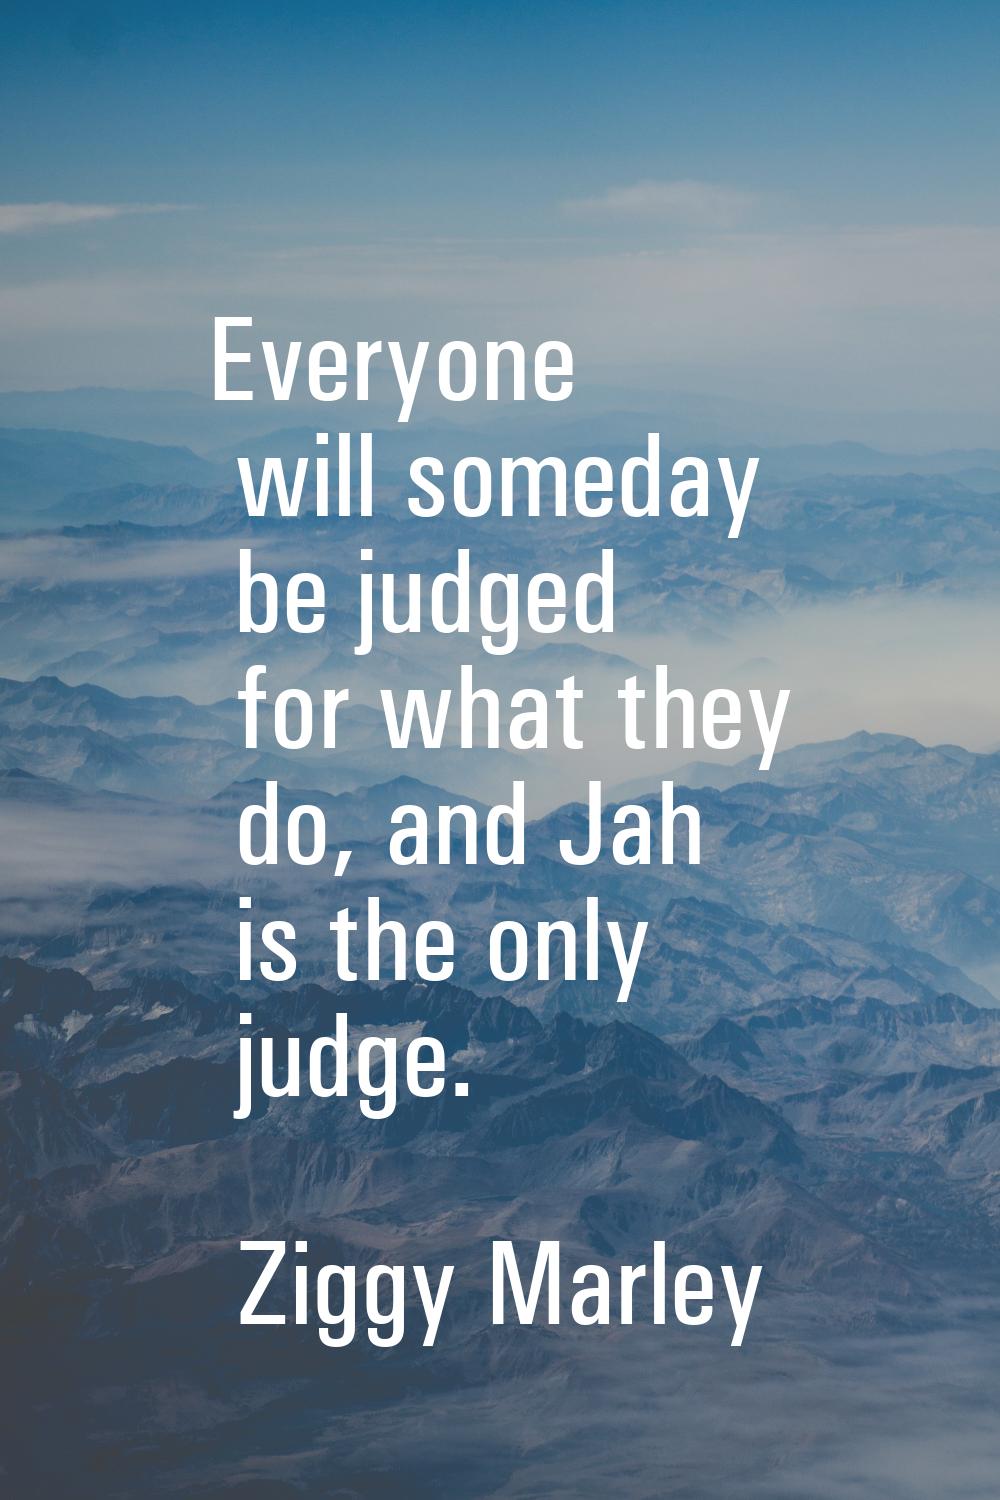 Everyone will someday be judged for what they do, and Jah is the only judge.